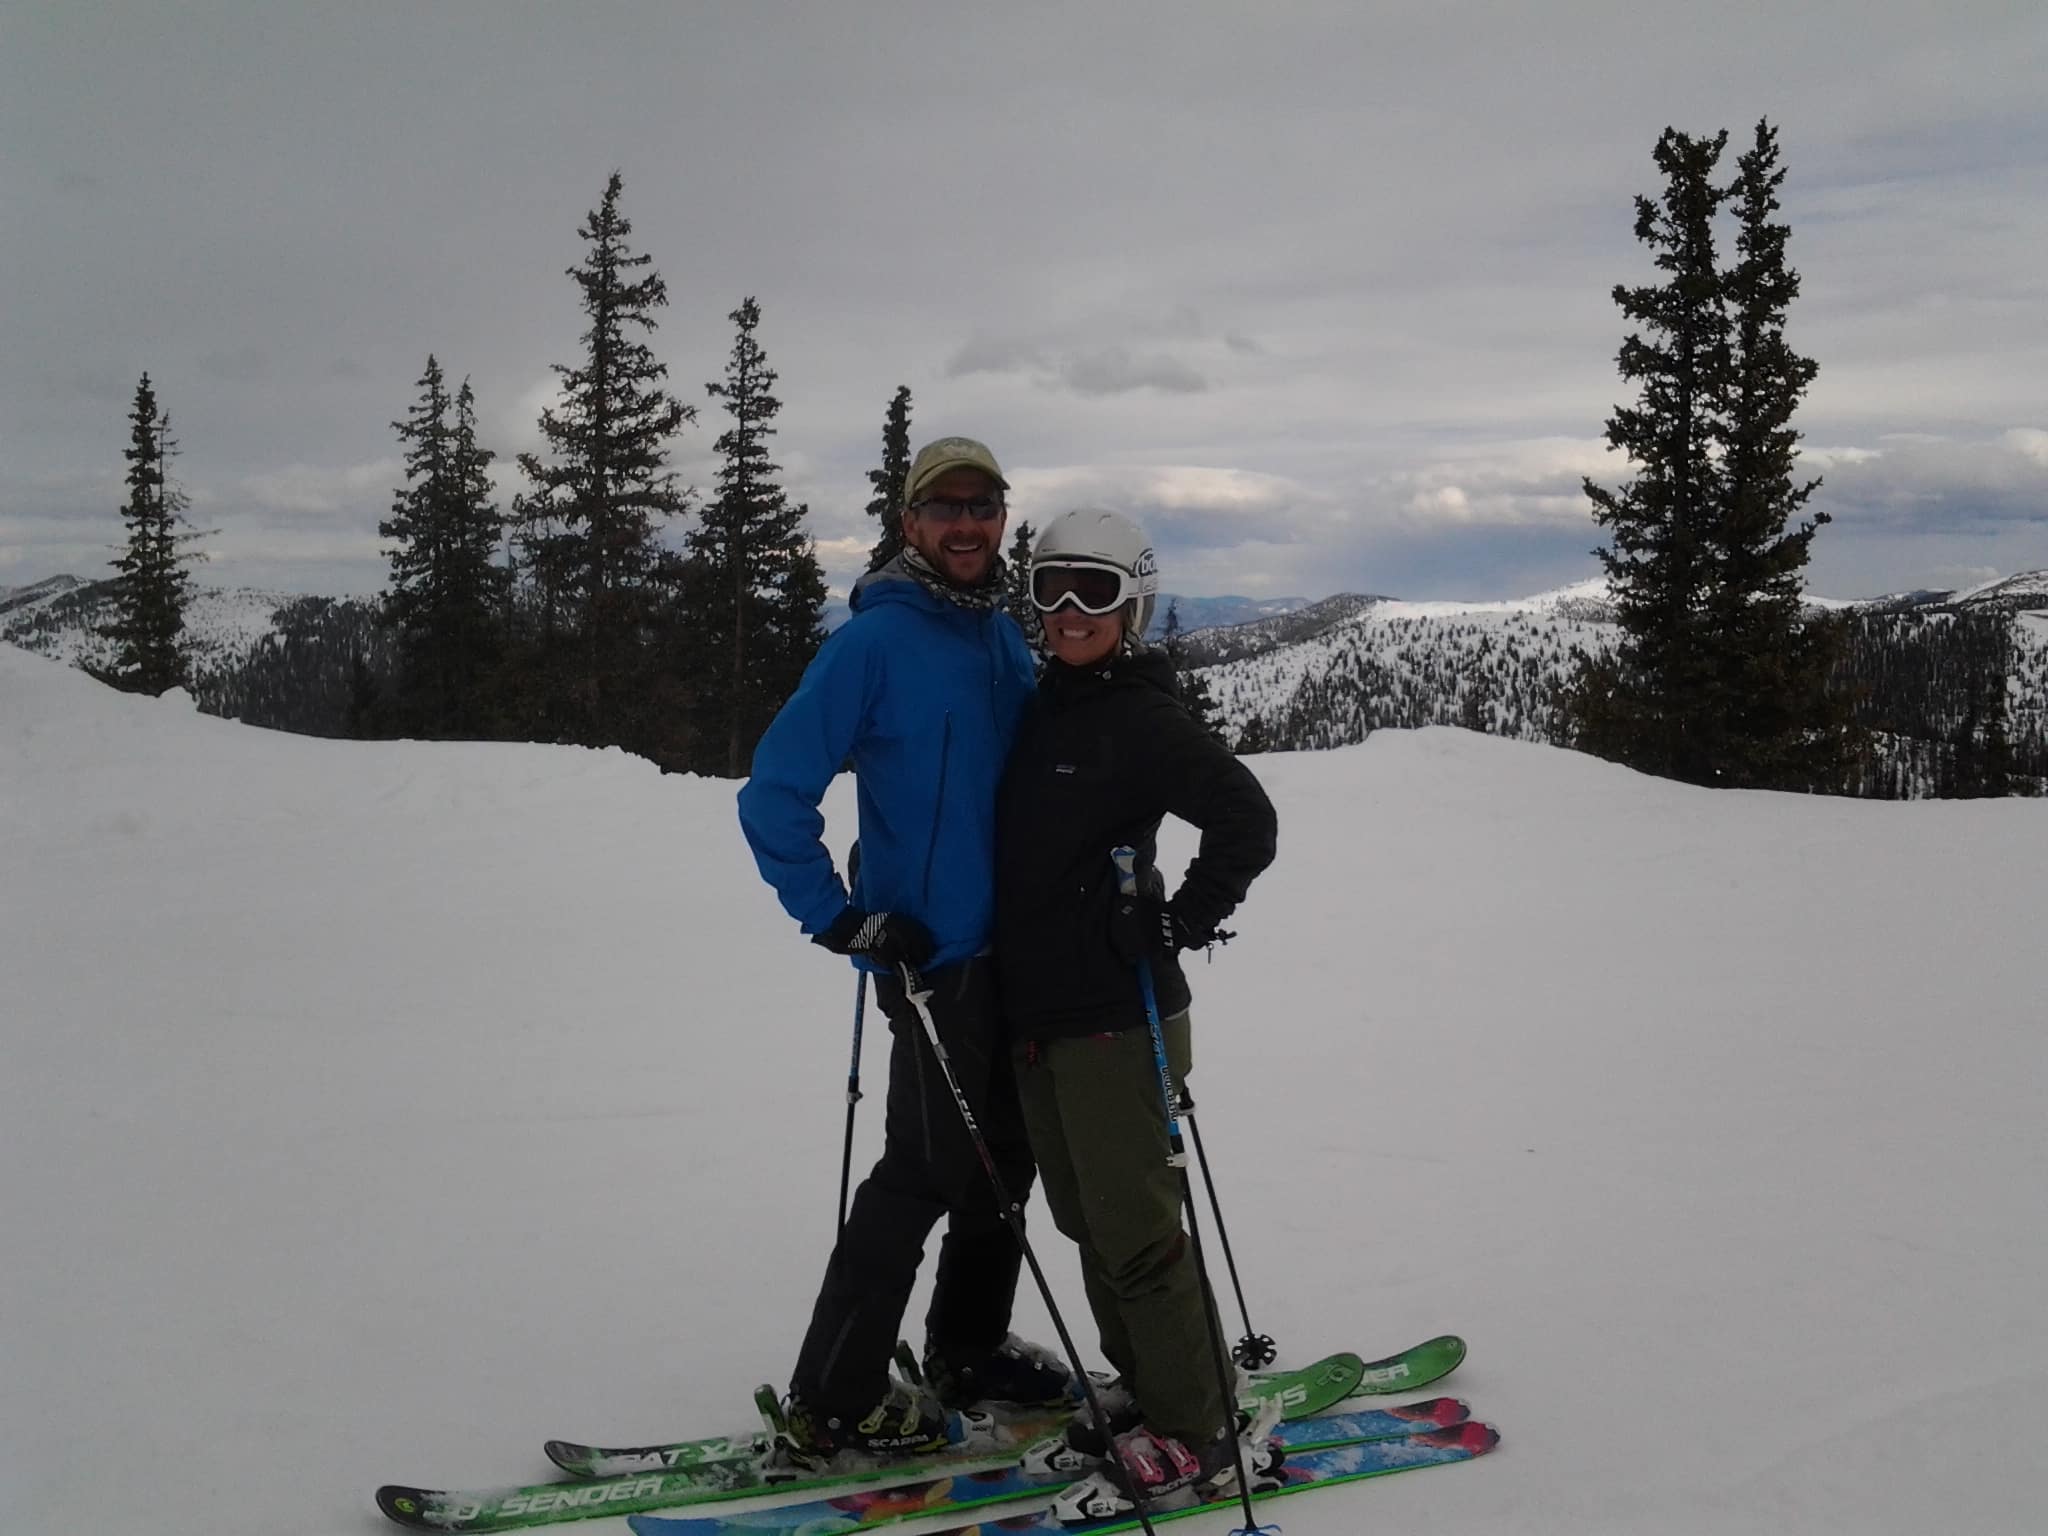 A couple skiing, posing for the camera with trees and mountains in the background.